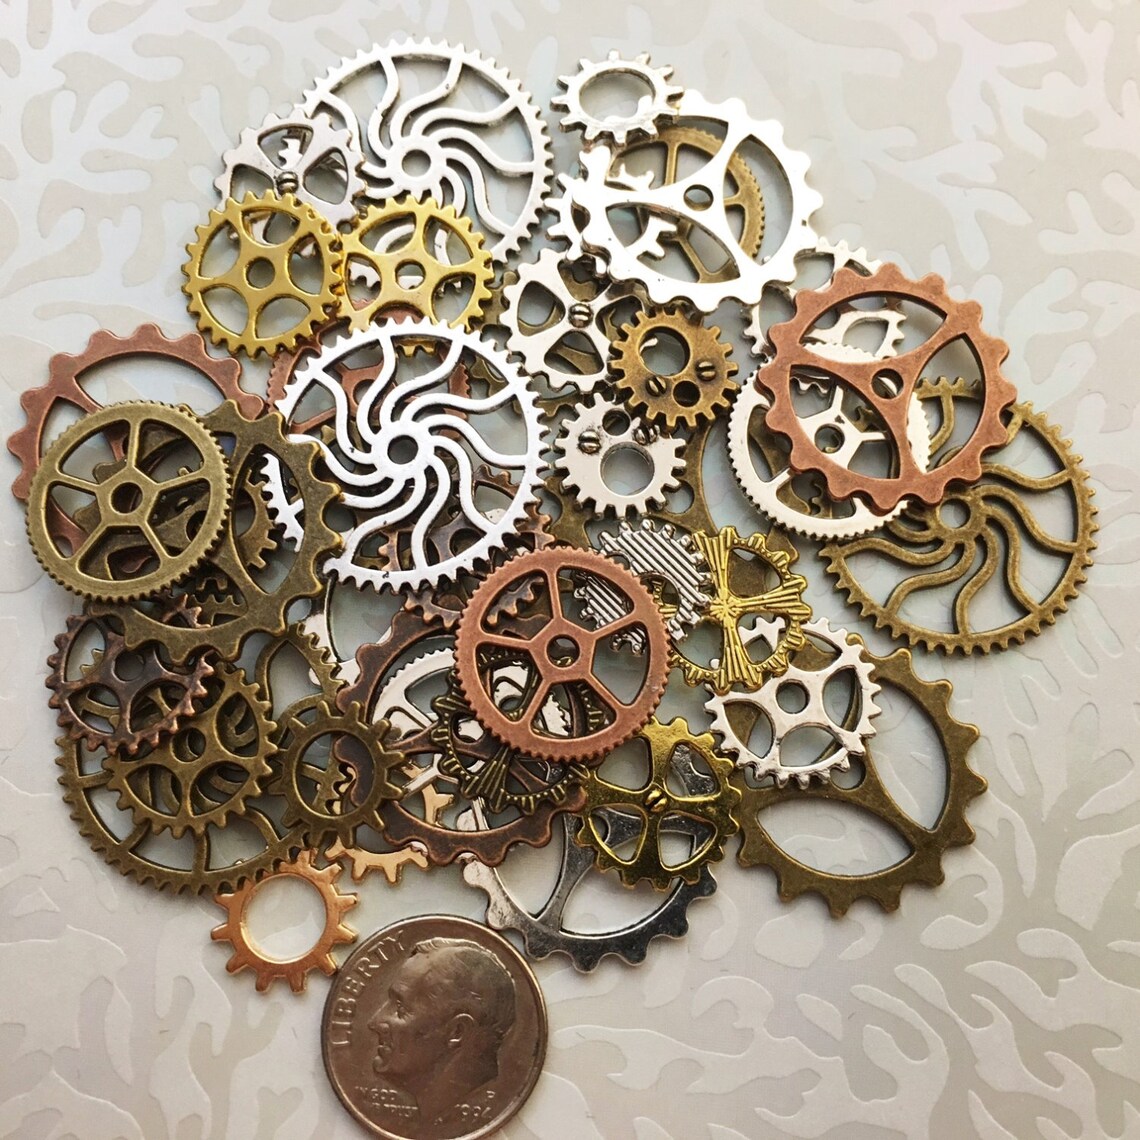 Steampunk Gears Cogs Buttons Watch Parts Altered Art Sprocket | Etsy